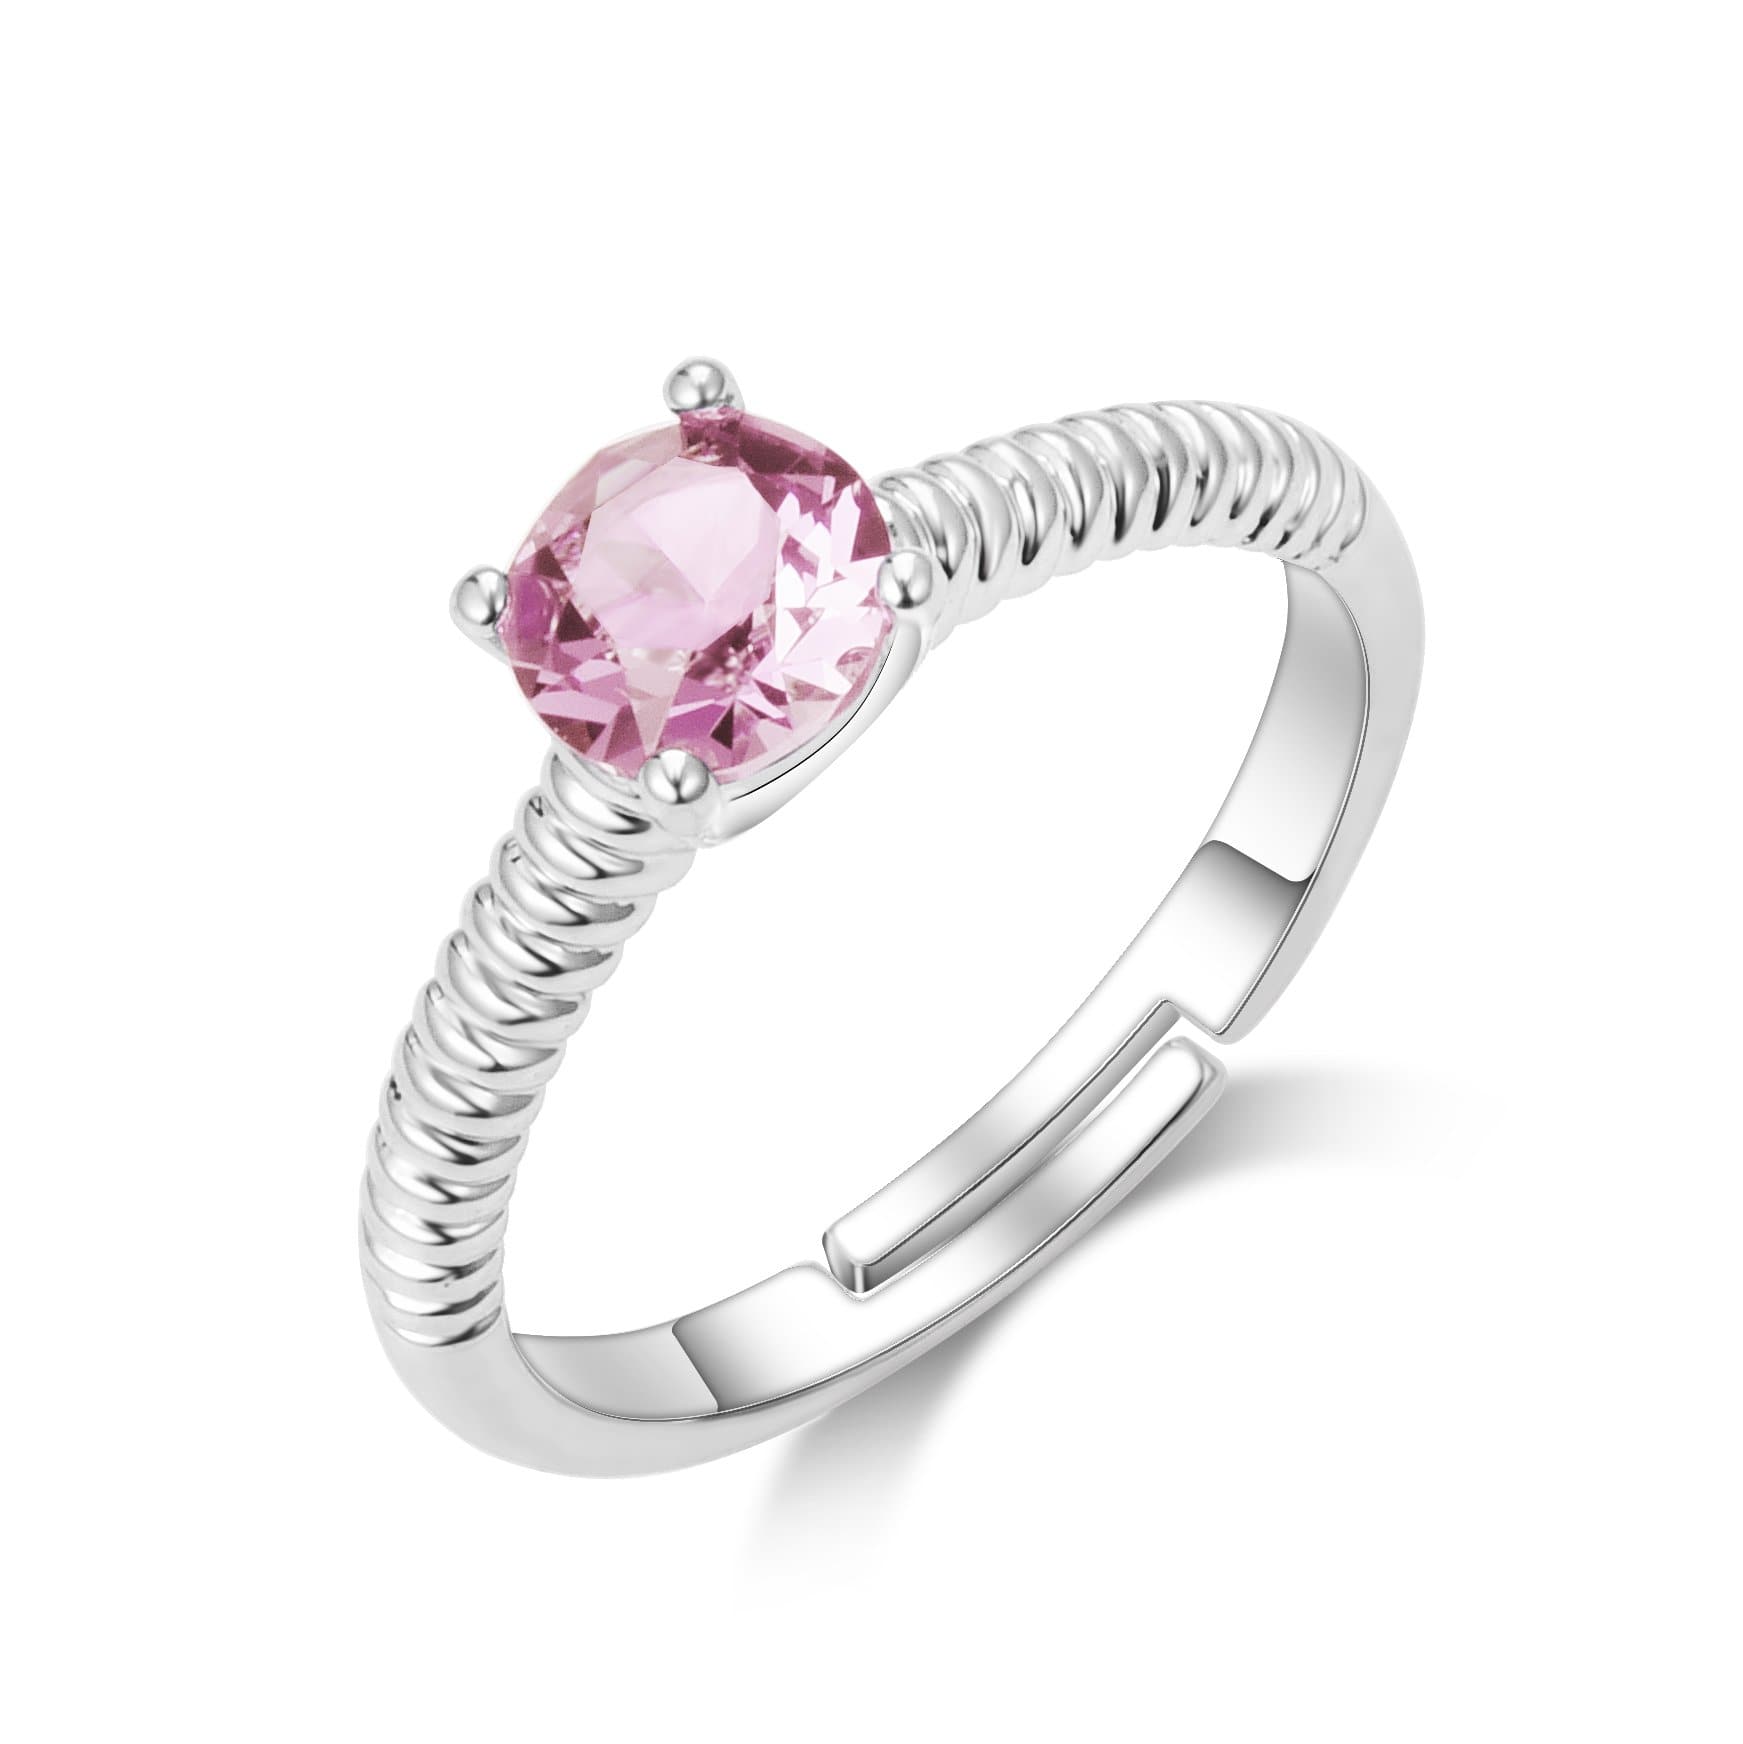 Pink Adjustable Crystal Ring Created with Zircondia® Crystals by Philip Jones Jewellery